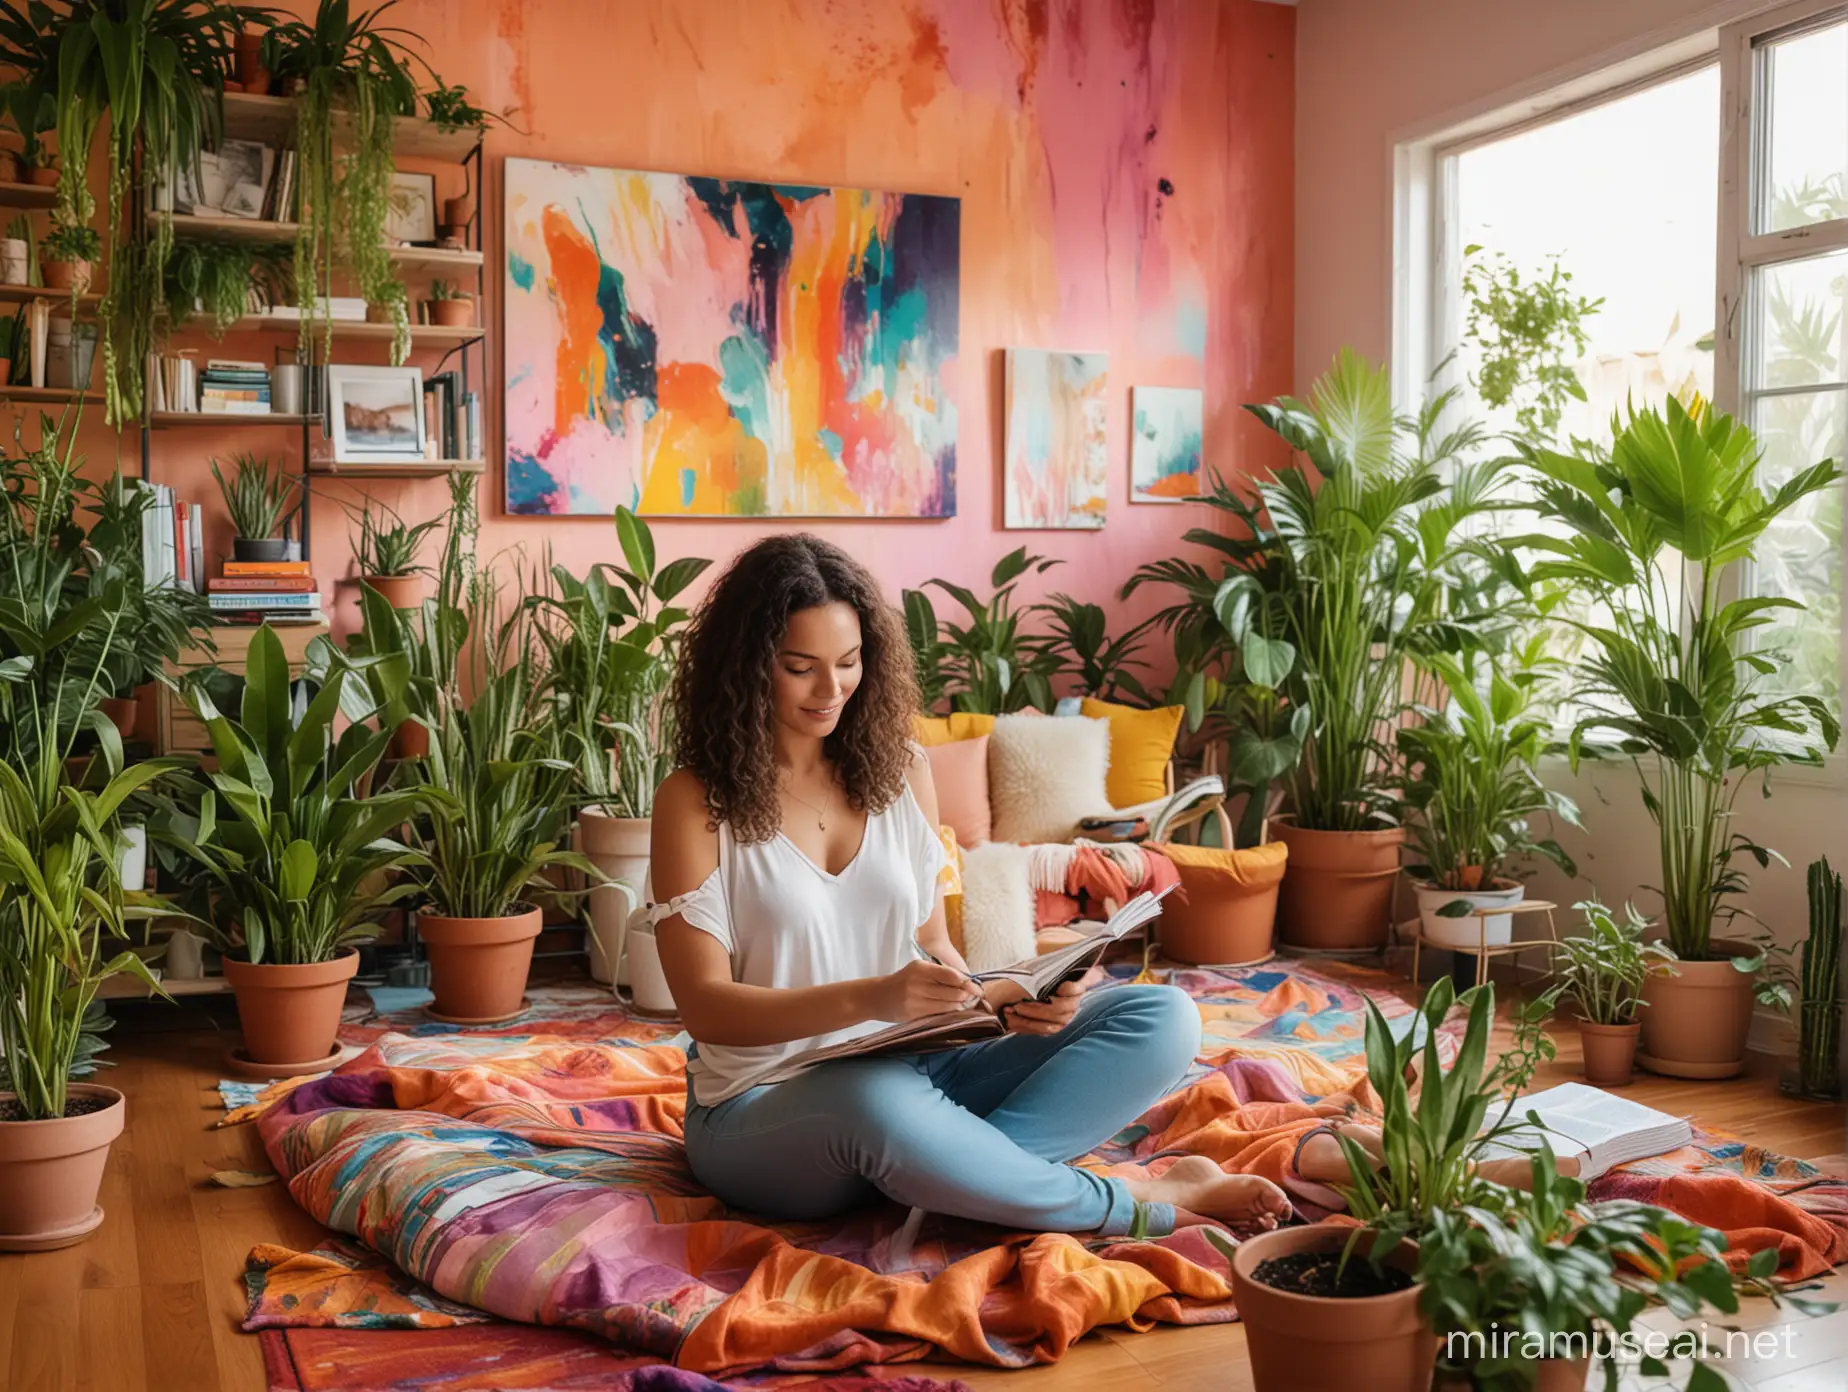 Vibrant Abstract Background Woman Engages in SelfAwareness Journaling in Living Room Oasis